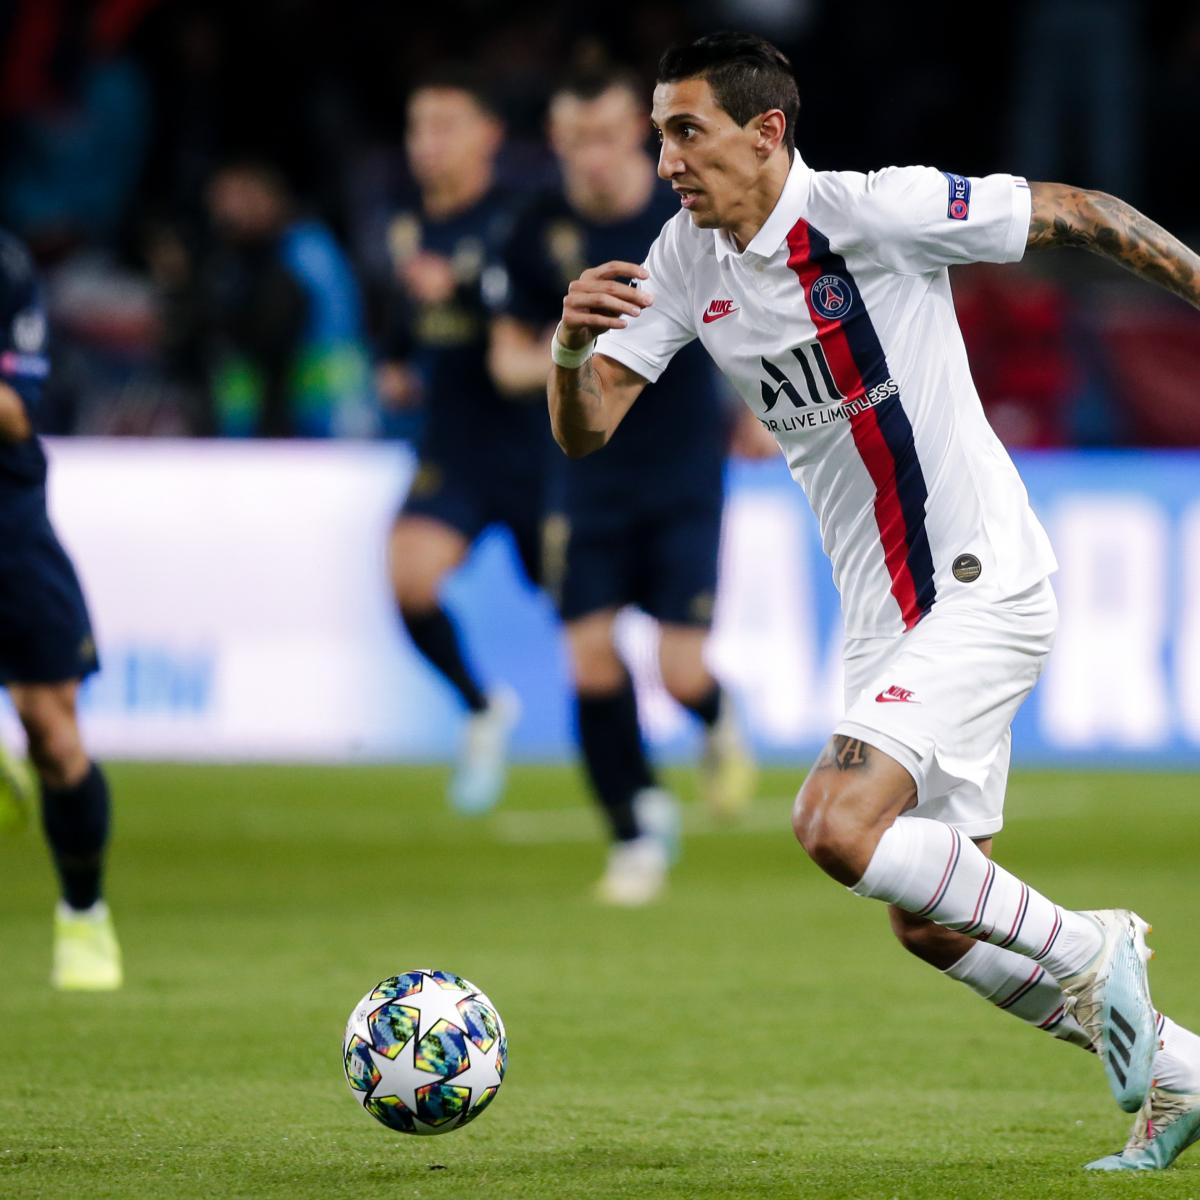 Real Madrid vs. PSG: UCL Odds, Live Stream, TV Schedule - Bleacher Report - Latest News, Videos ...